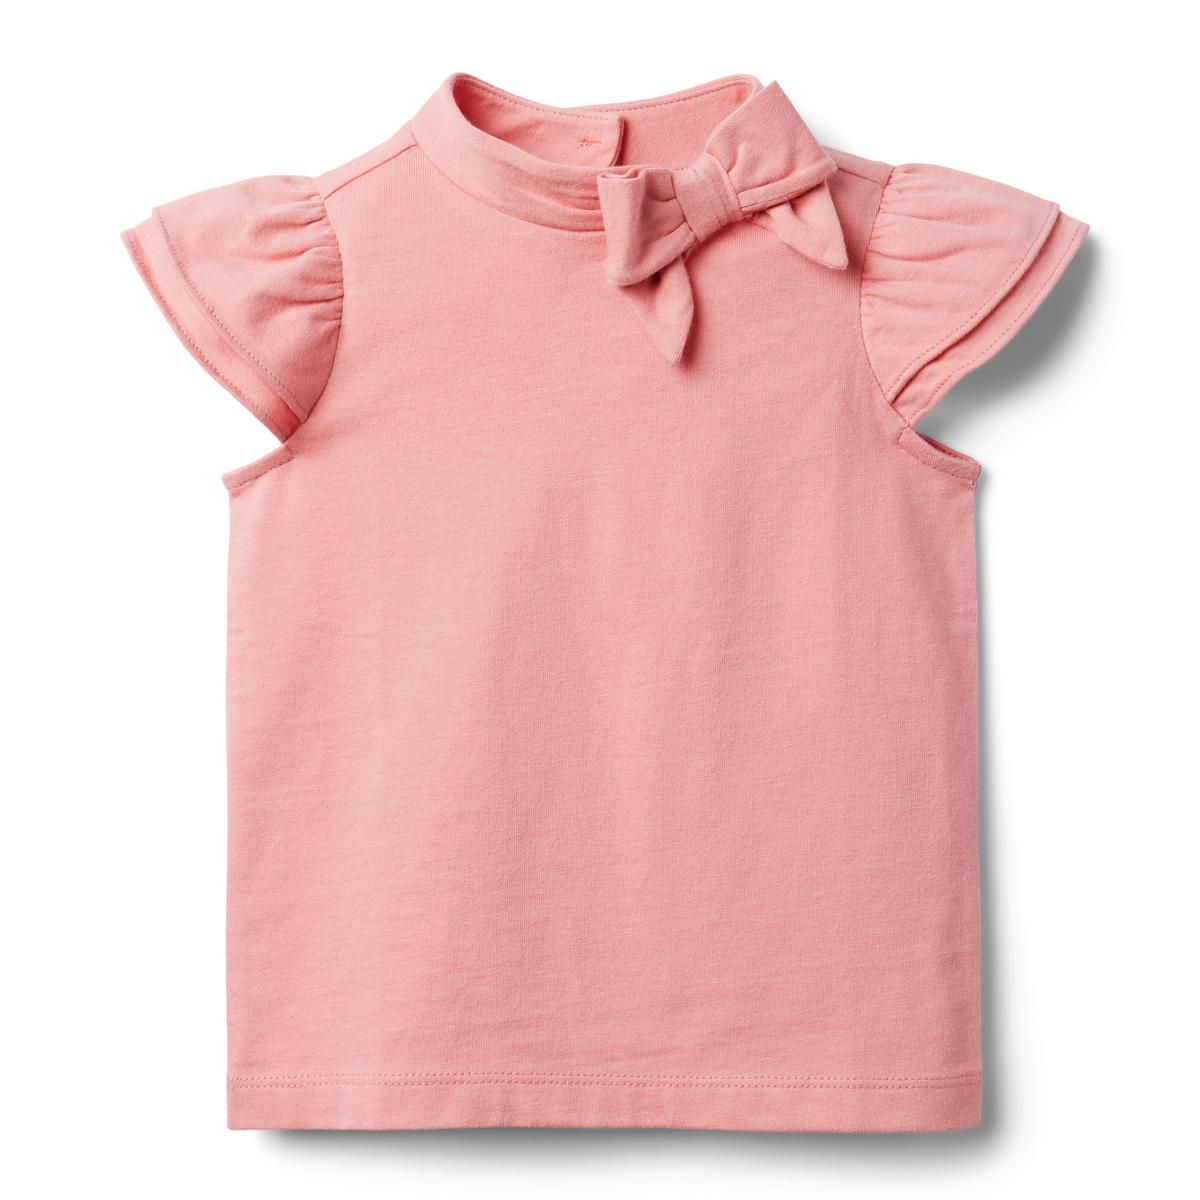 Ruffle Sleeve Bow Jersey Top | Janie and Jack